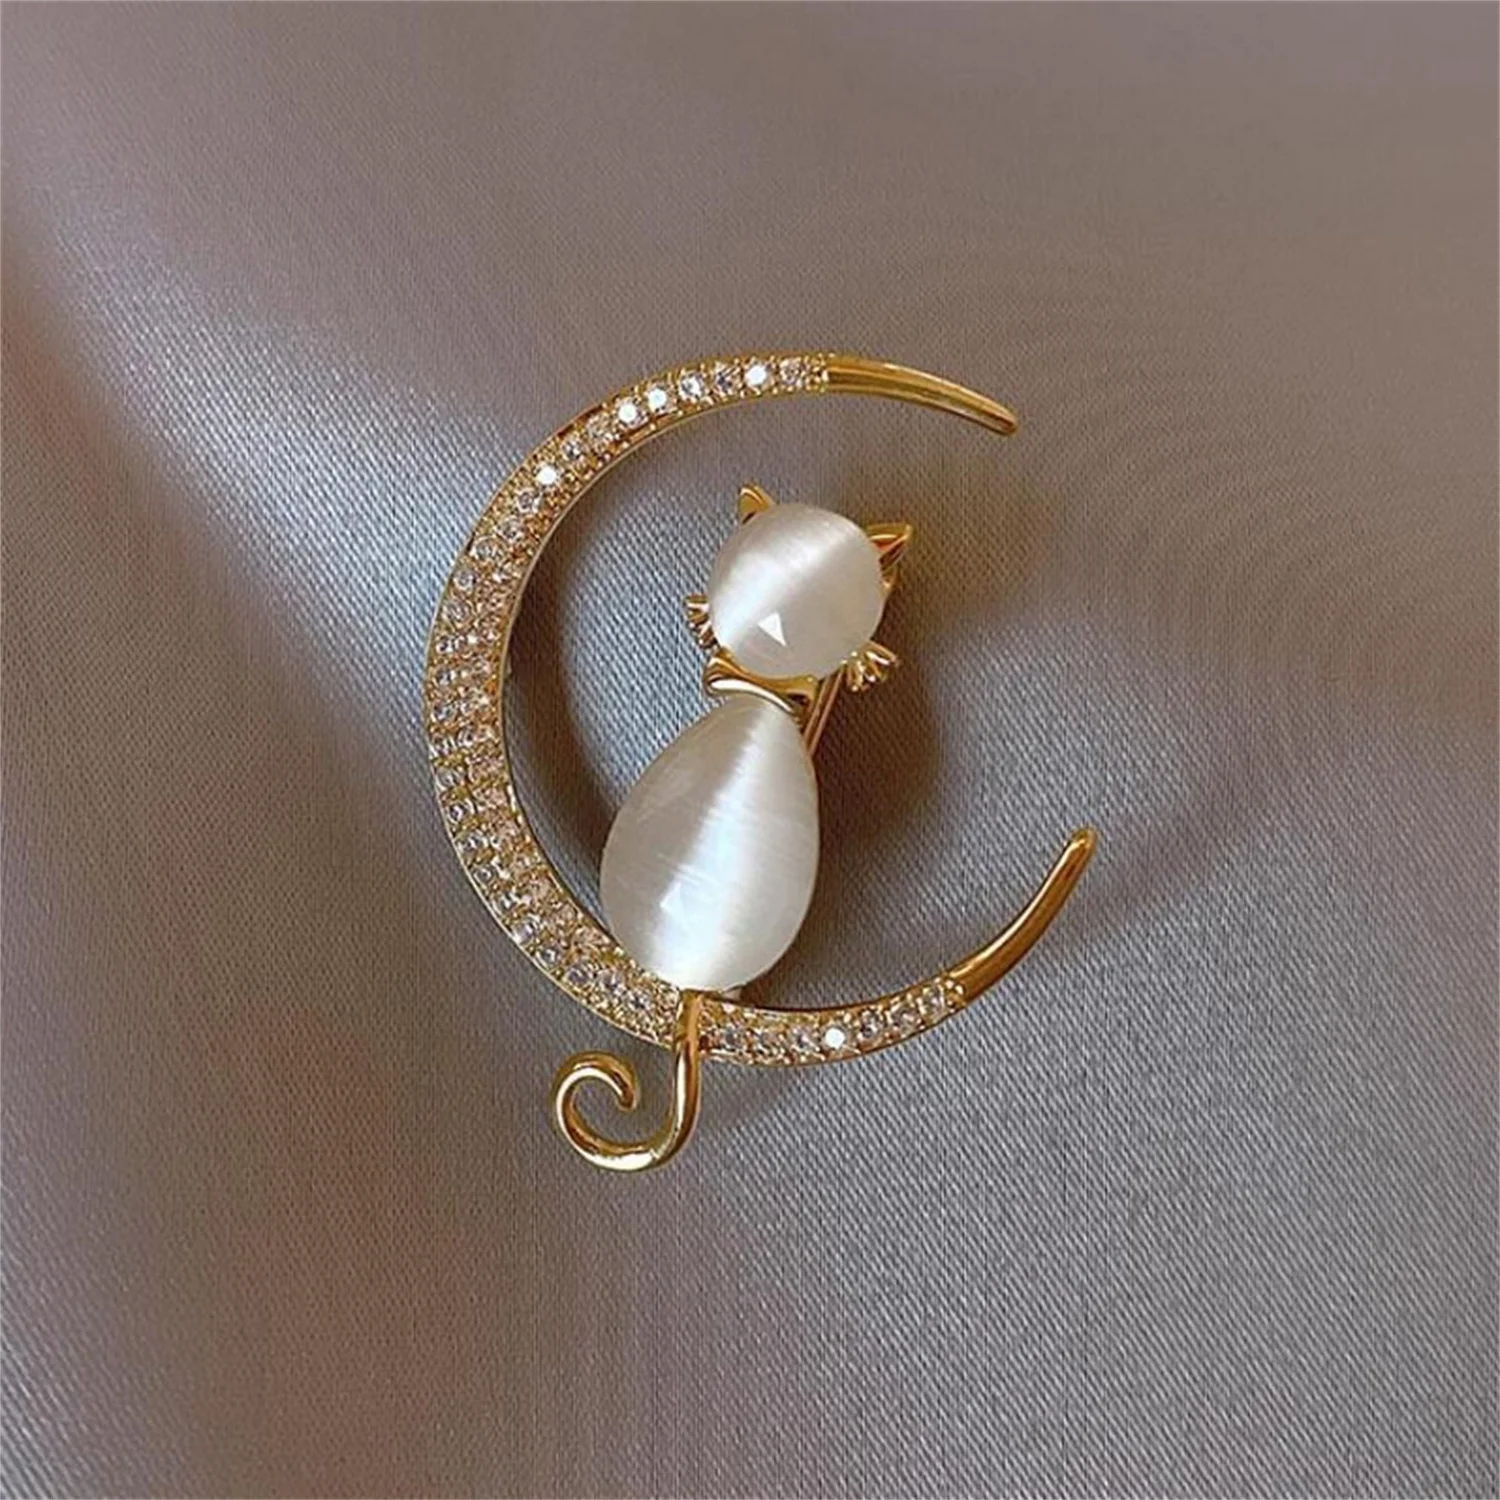 

Elegant Rhinestone Opal Stone Moon Cat Brooch Pin for Women Cute Kitten Animal Crystal Corsage Brooches Clothes Accessories Gift